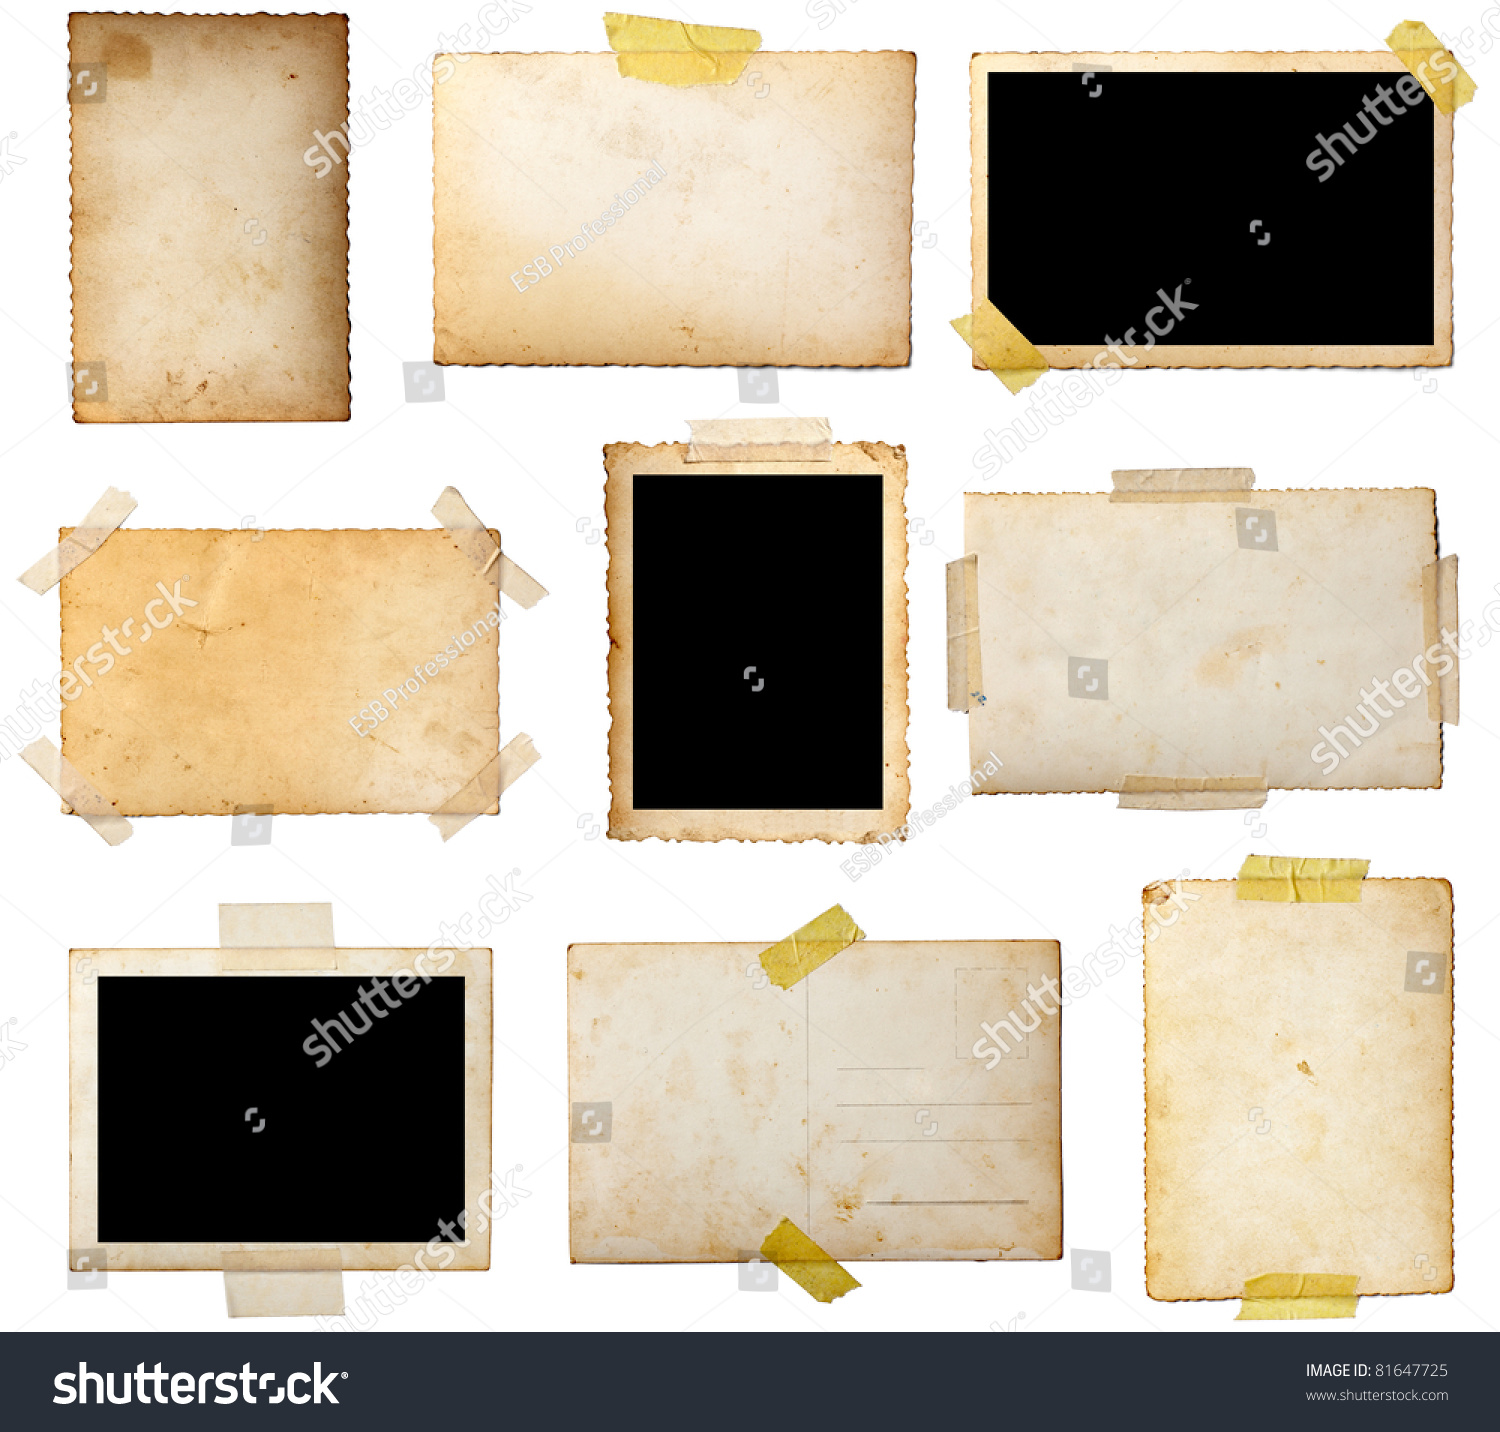 collection of various  old photos on white background. each one is shot separately #81647725